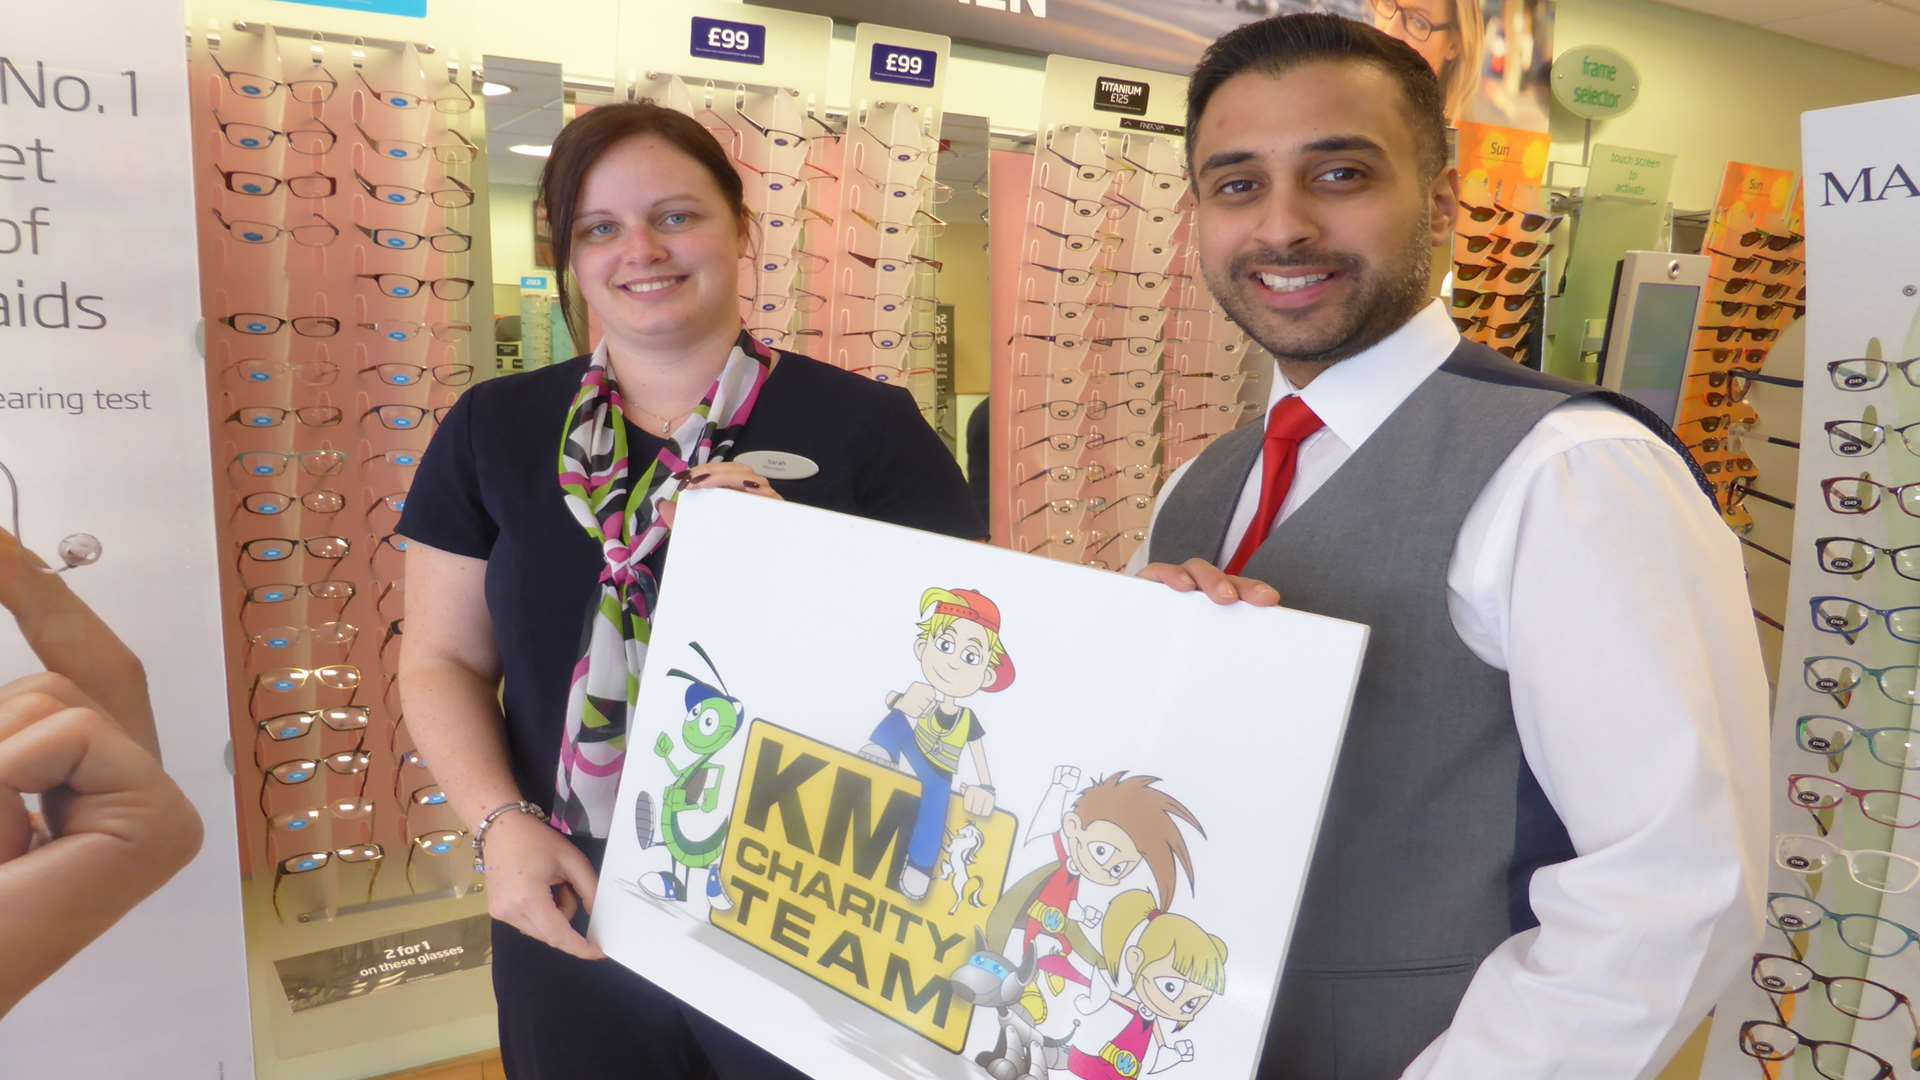 Specsavers Dover Manager Sarah Kittlety and Director Pritin Patel showcase support for KM Walk to School